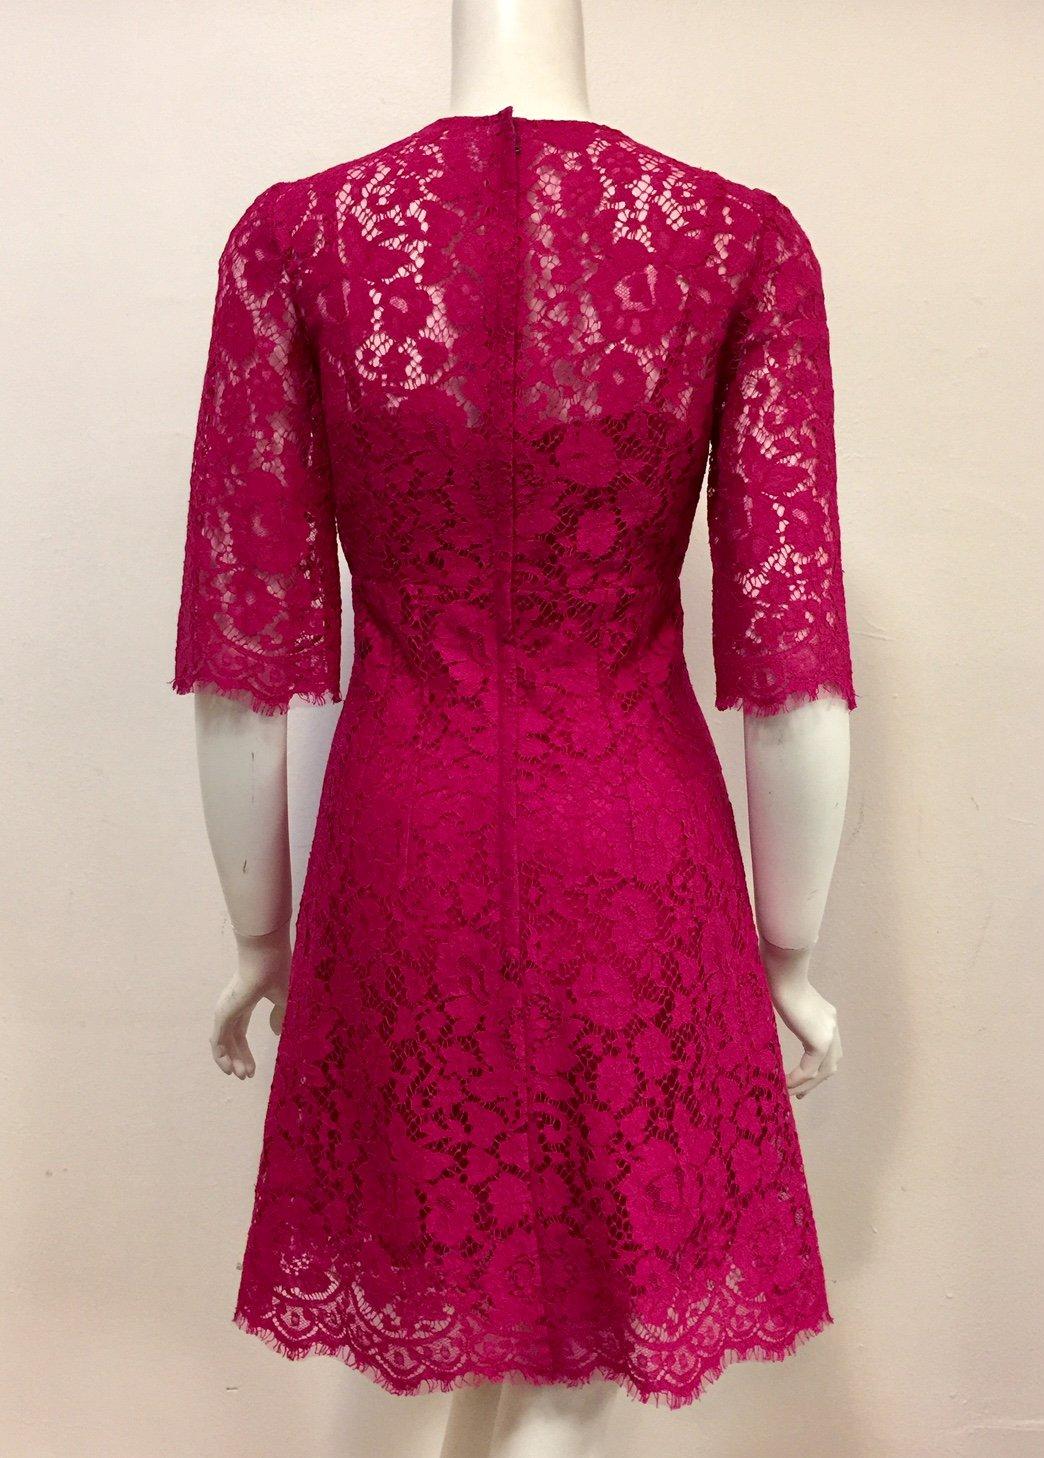  Dolce & Gabbana Rose Pink Lace Dress With Full Satin & Lace Slip 38 EU In Excellent Condition For Sale In Palm Beach, FL